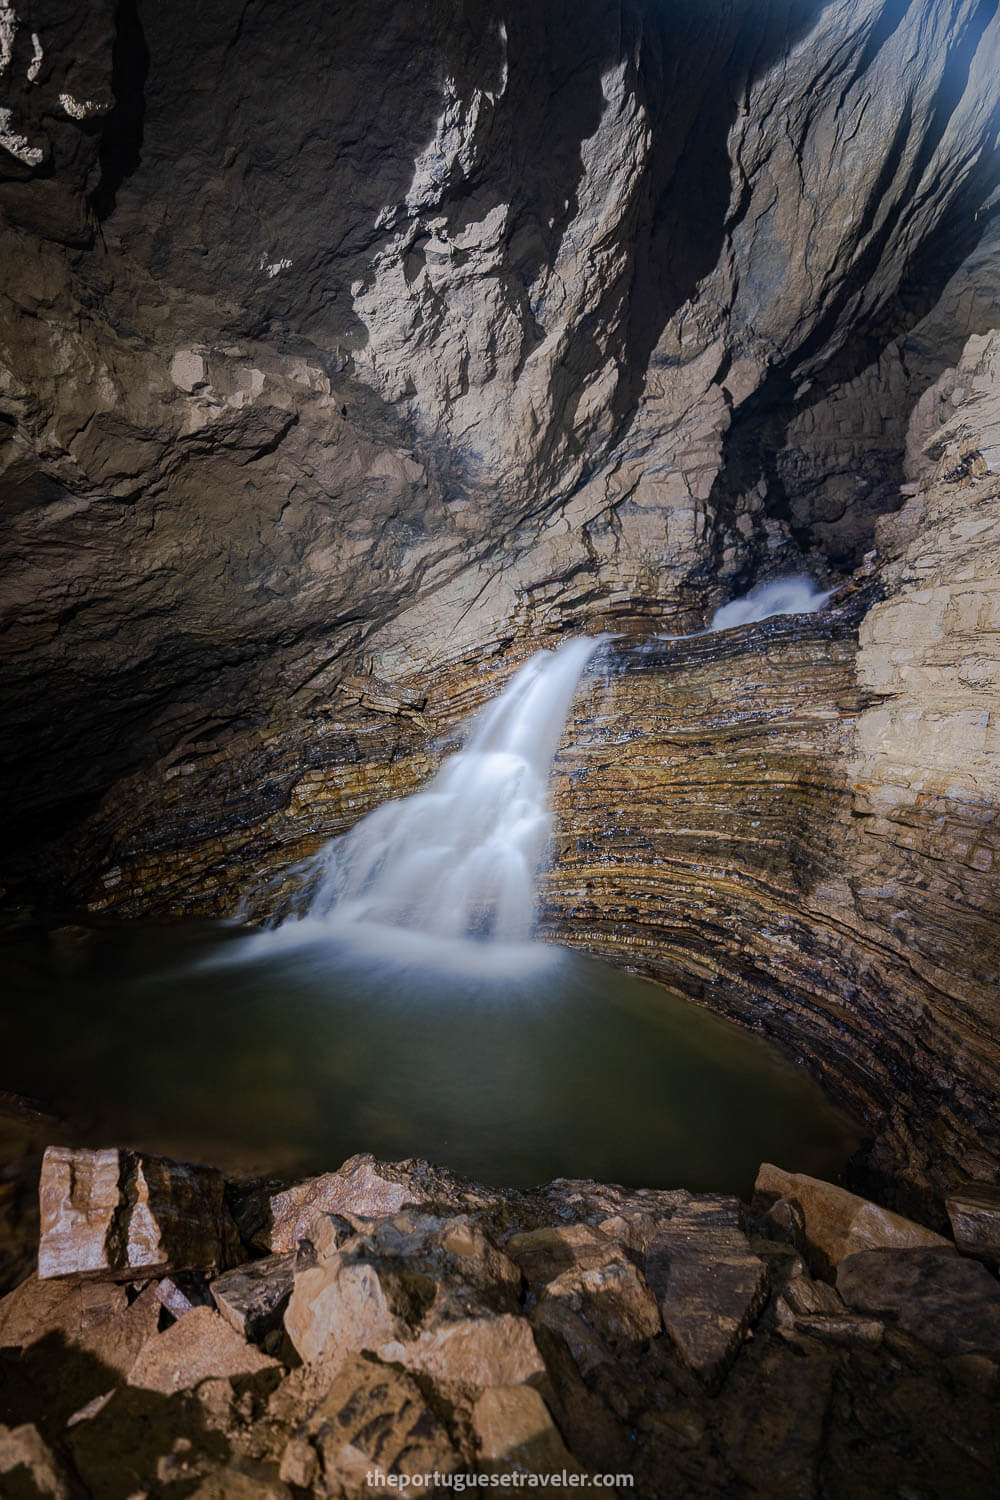 The main waterfall inside the cave